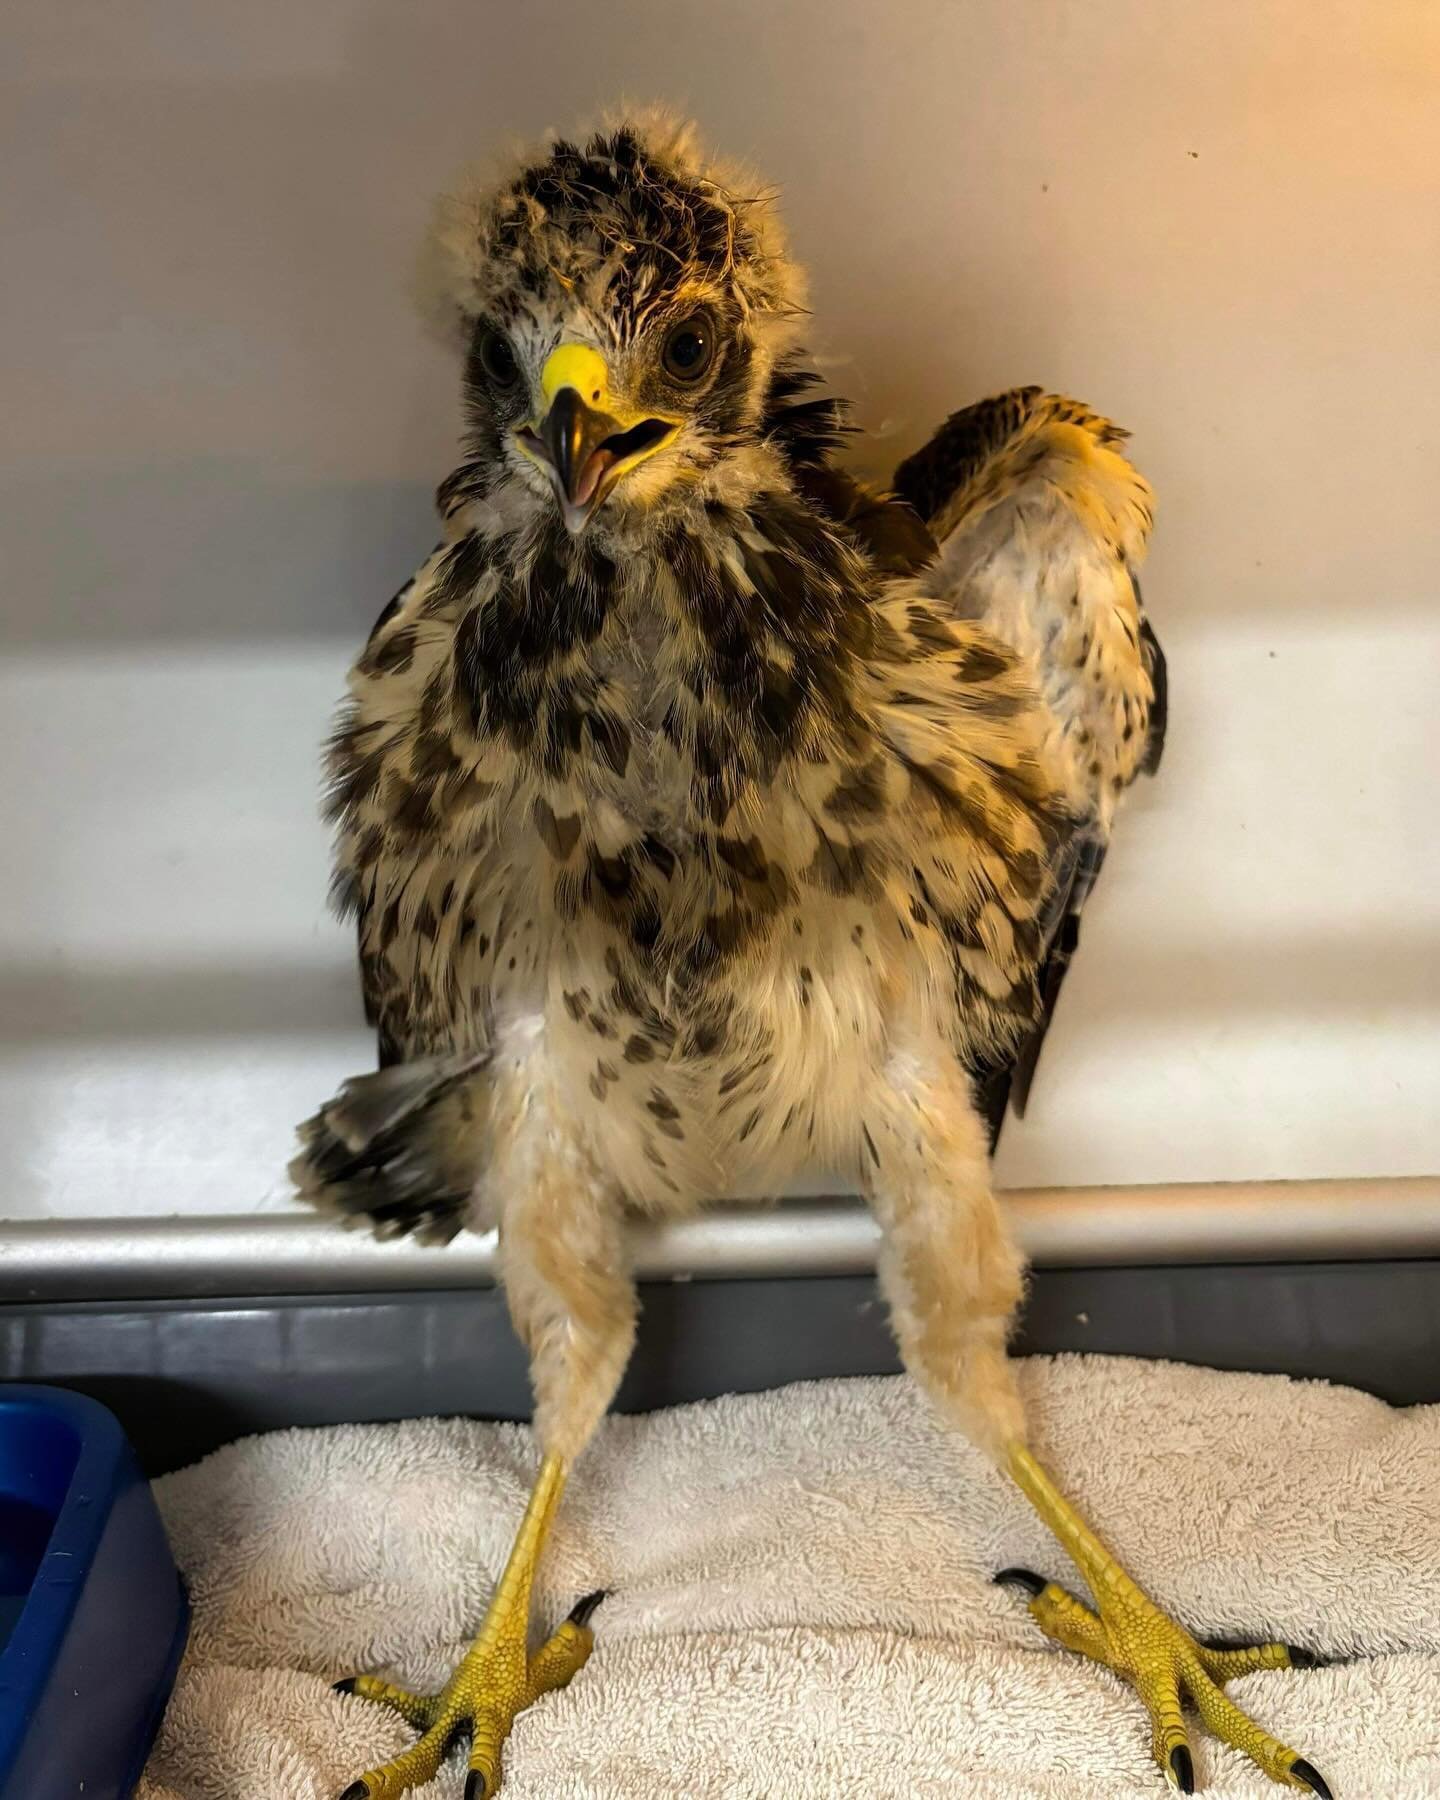 #WildlifeWednesday #WishListWednesday
This juvenile red-shouldered hawk was found in someone&rsquo;s yard with an injured left side in a clear show of discomfort. After intake, we observed the bird&rsquo;s left shoulder was drooping and was very pain